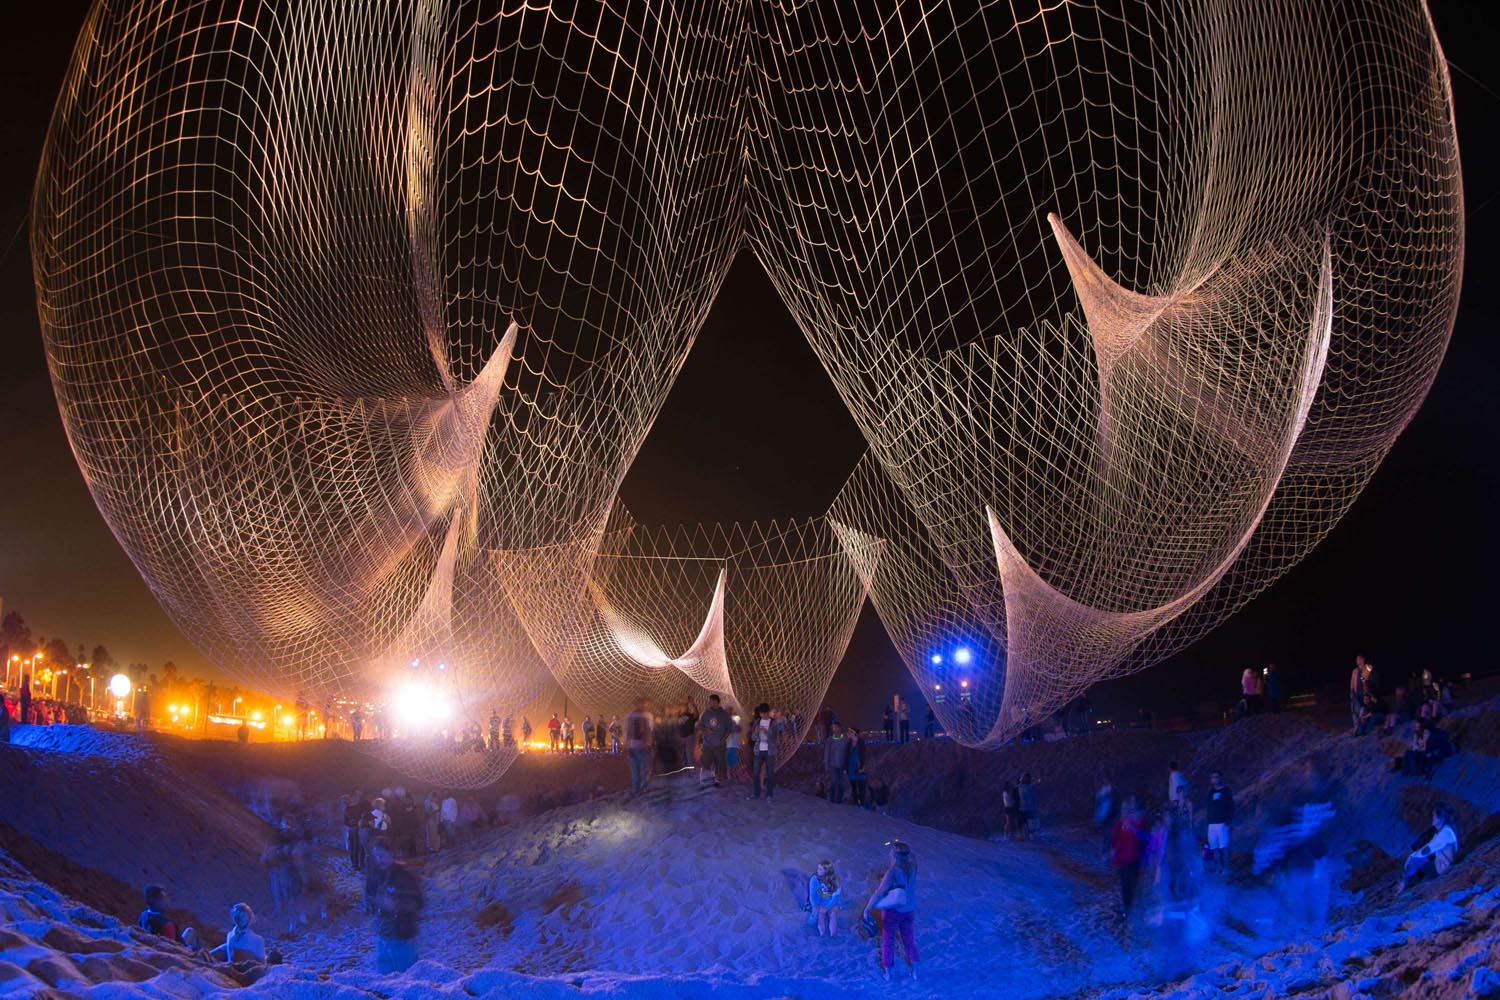 Sept. 29, 2013. Visitors explore the creation of artist Janet Echelman 'The Space Between Us' during Glow 2013 at the beach in Santa Monica, Calif.